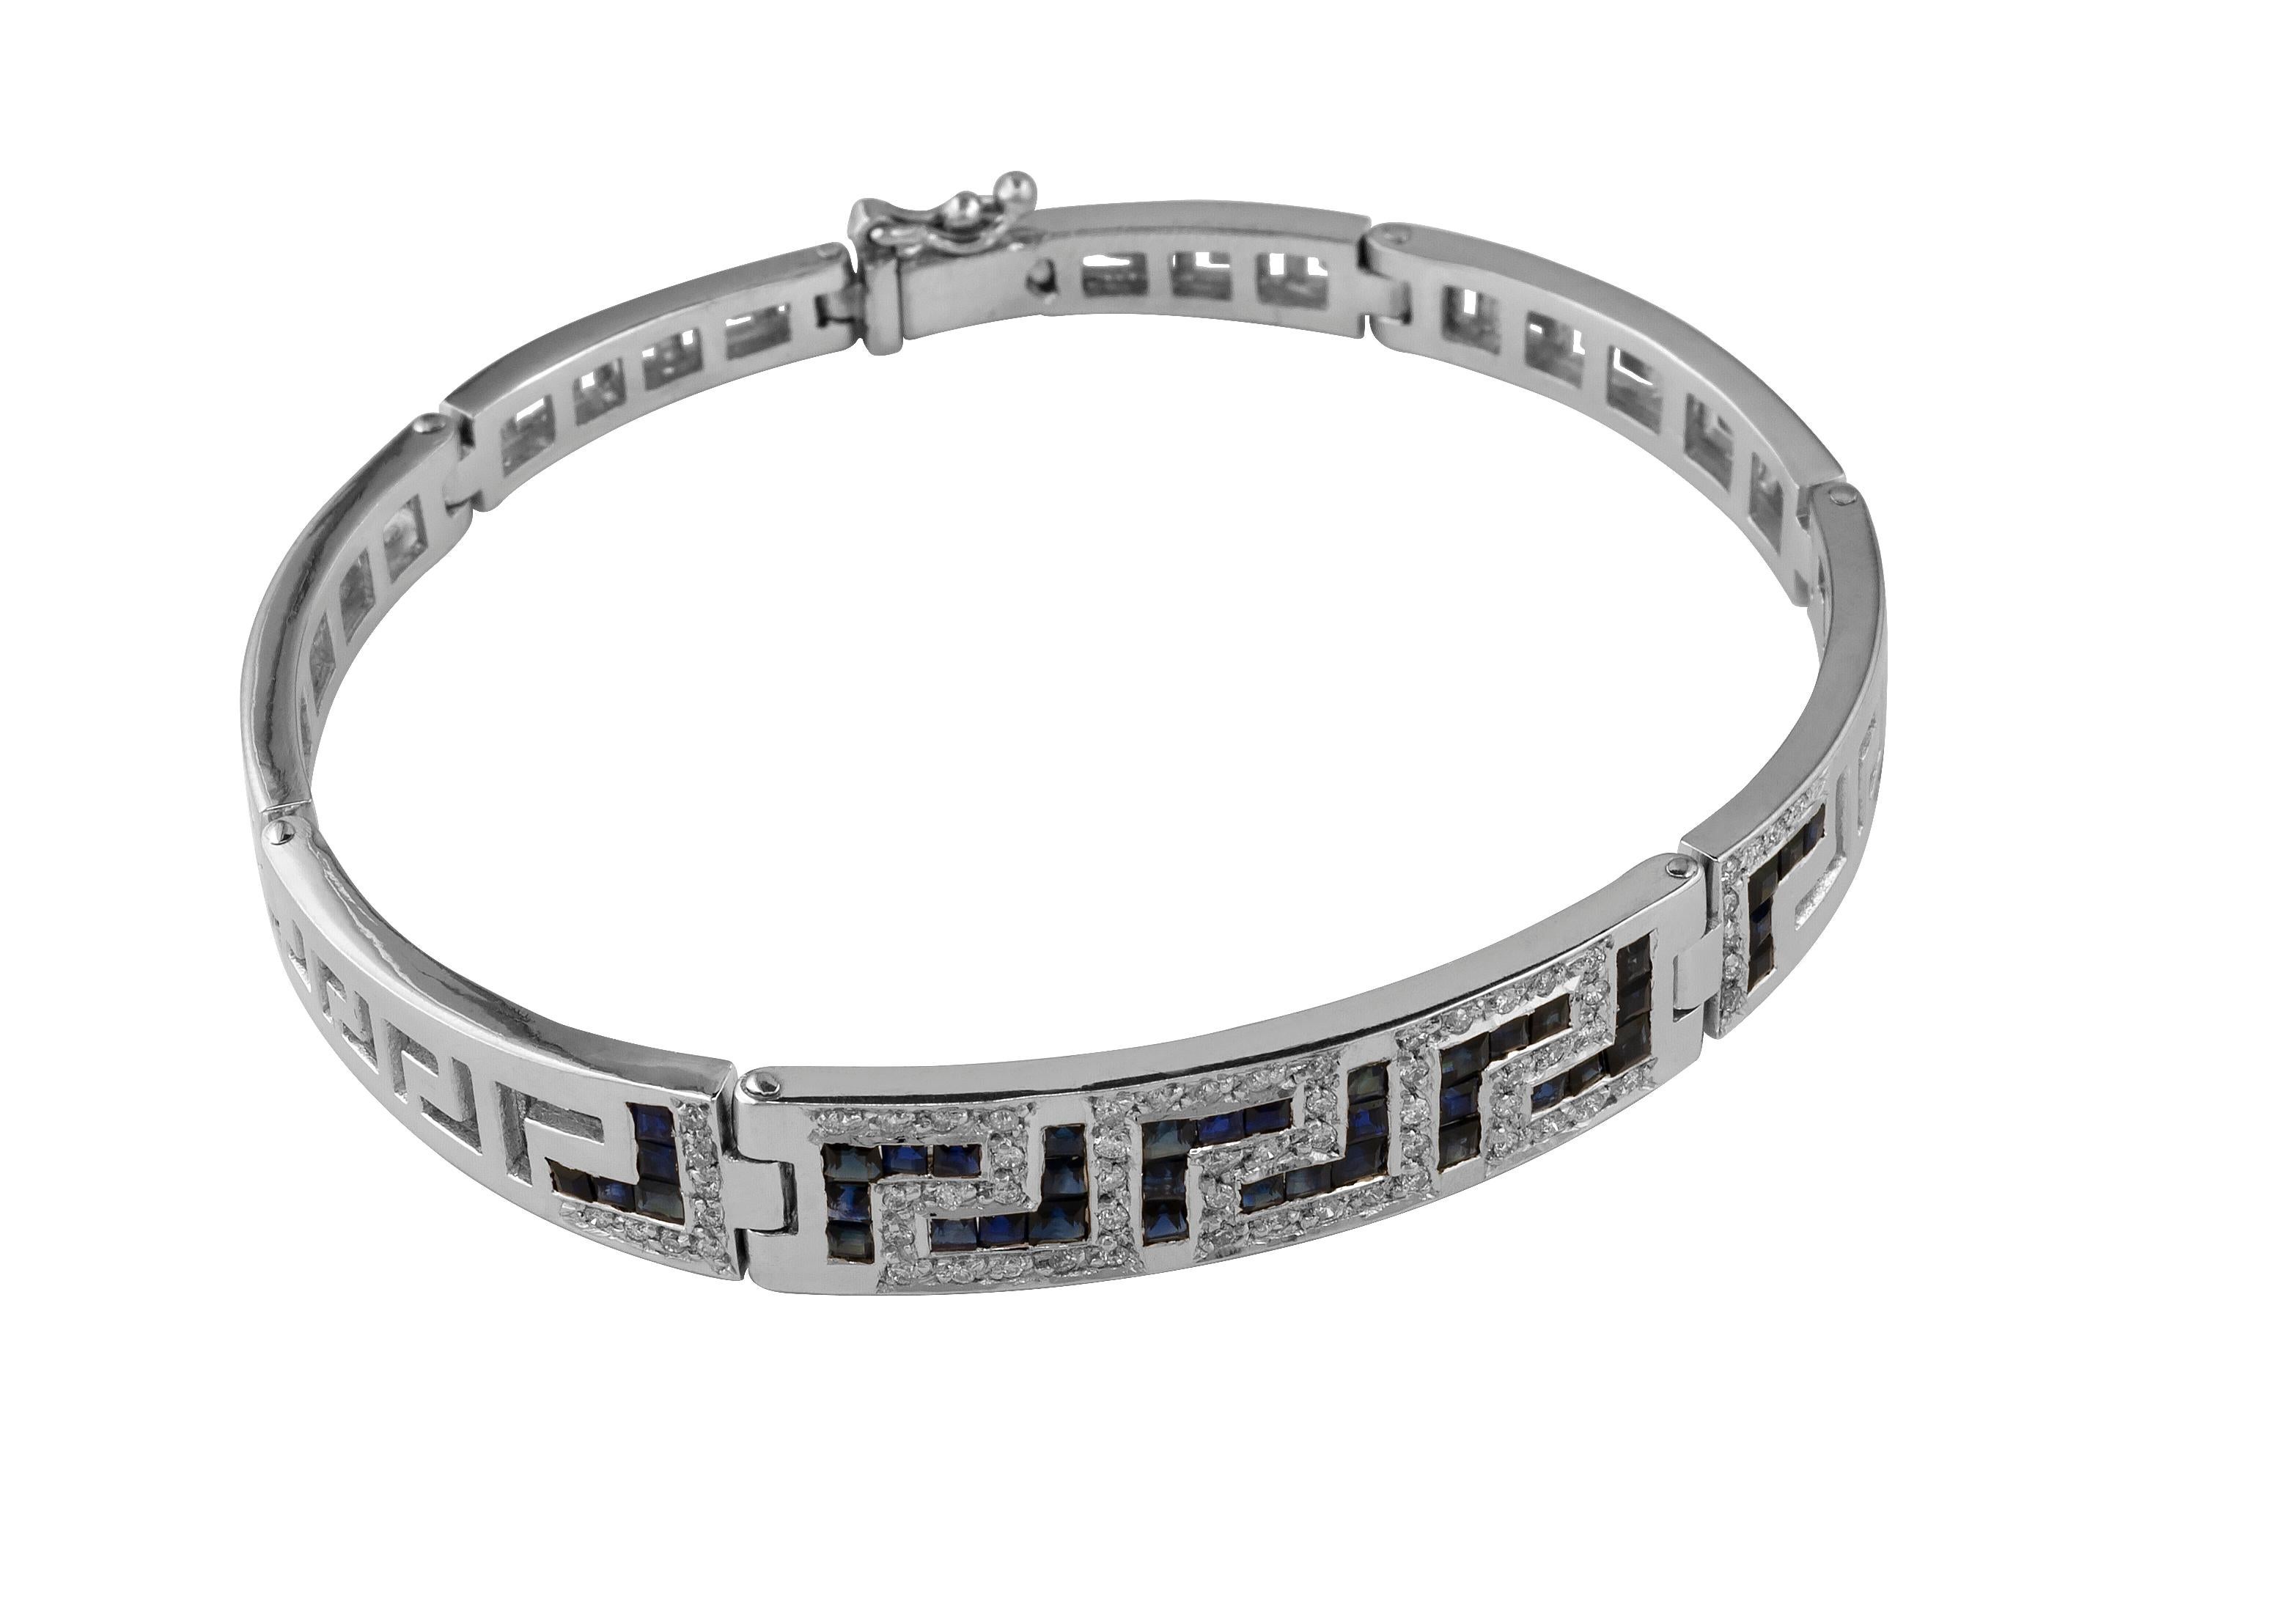 S.Georgios designer link bracelet in solid 18 karats White Gold all handmade with the Greek Key design, the symbol of eternal life. The gorgeous Bracelet is custom made and has 65 brilliant cut white diamonds total weight of 0.56 Carat and 40